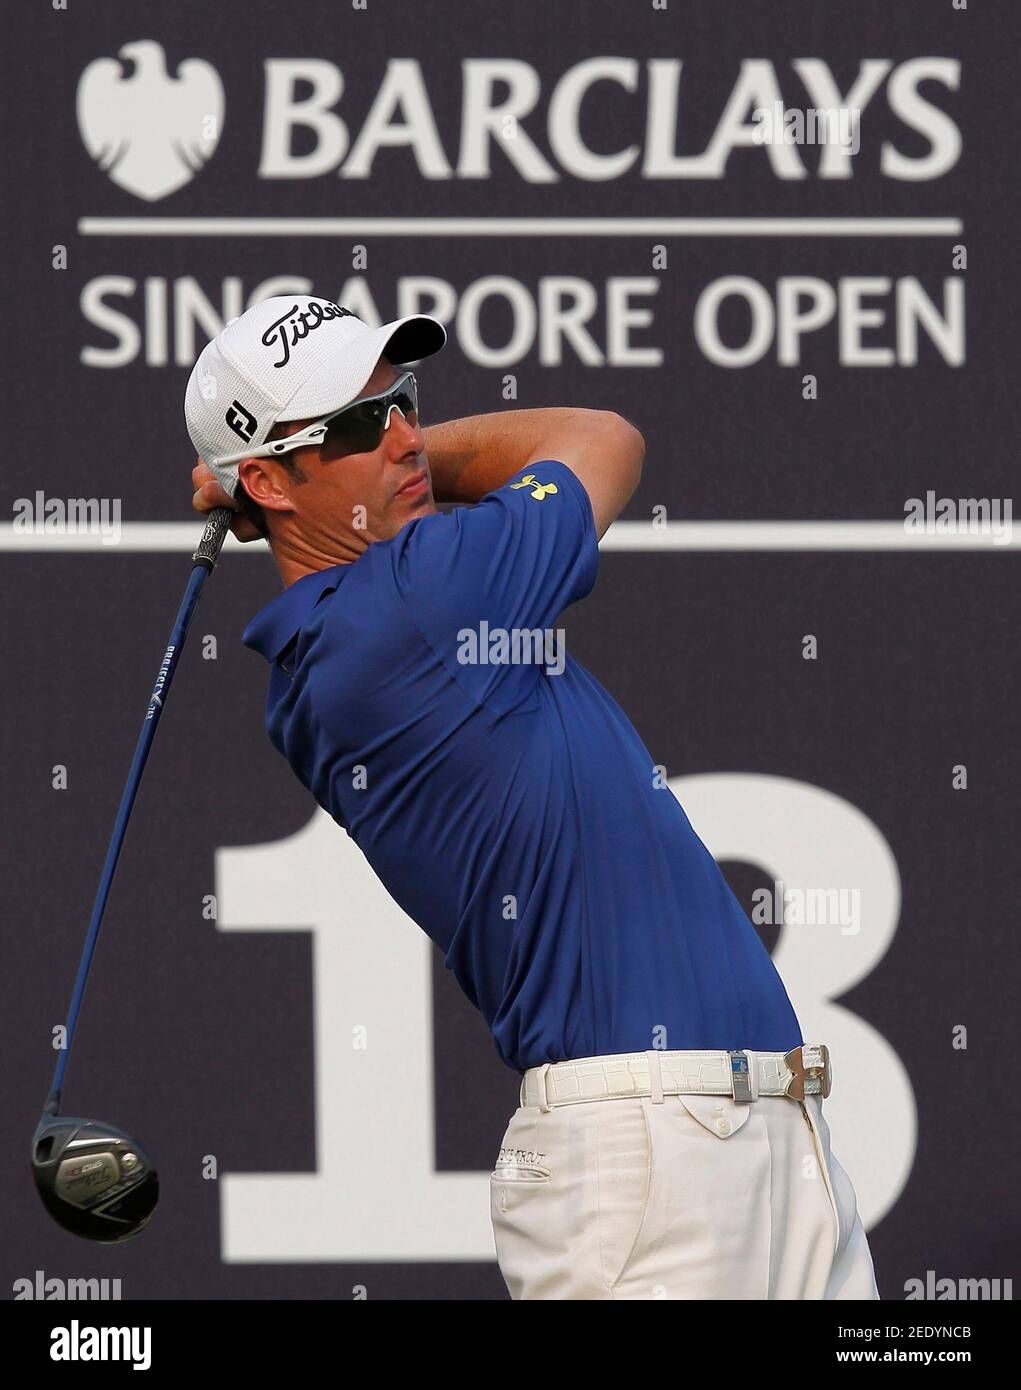 Golf - Barclays Singapore Open - Sentosa Golf Club, Singapore - 10/11/11  England's Ross Fisher tees off from the 18th tee on the Serapong course  during the first round Mandatory Credit: Action